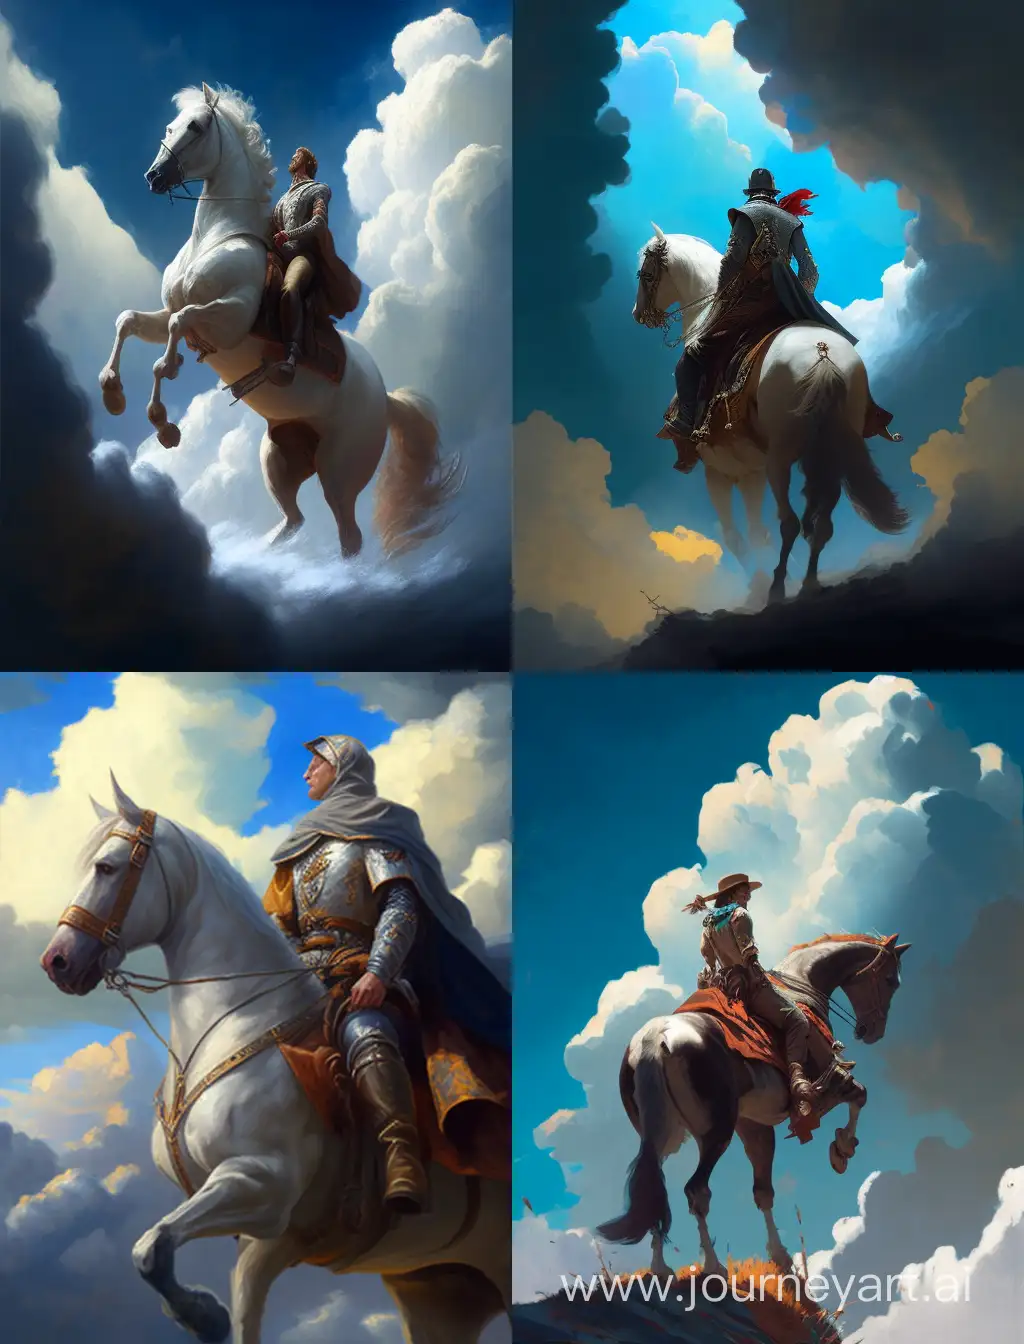 Knight-Riding-Horse-Gazing-into-Distance-under-Dramatic-Sky